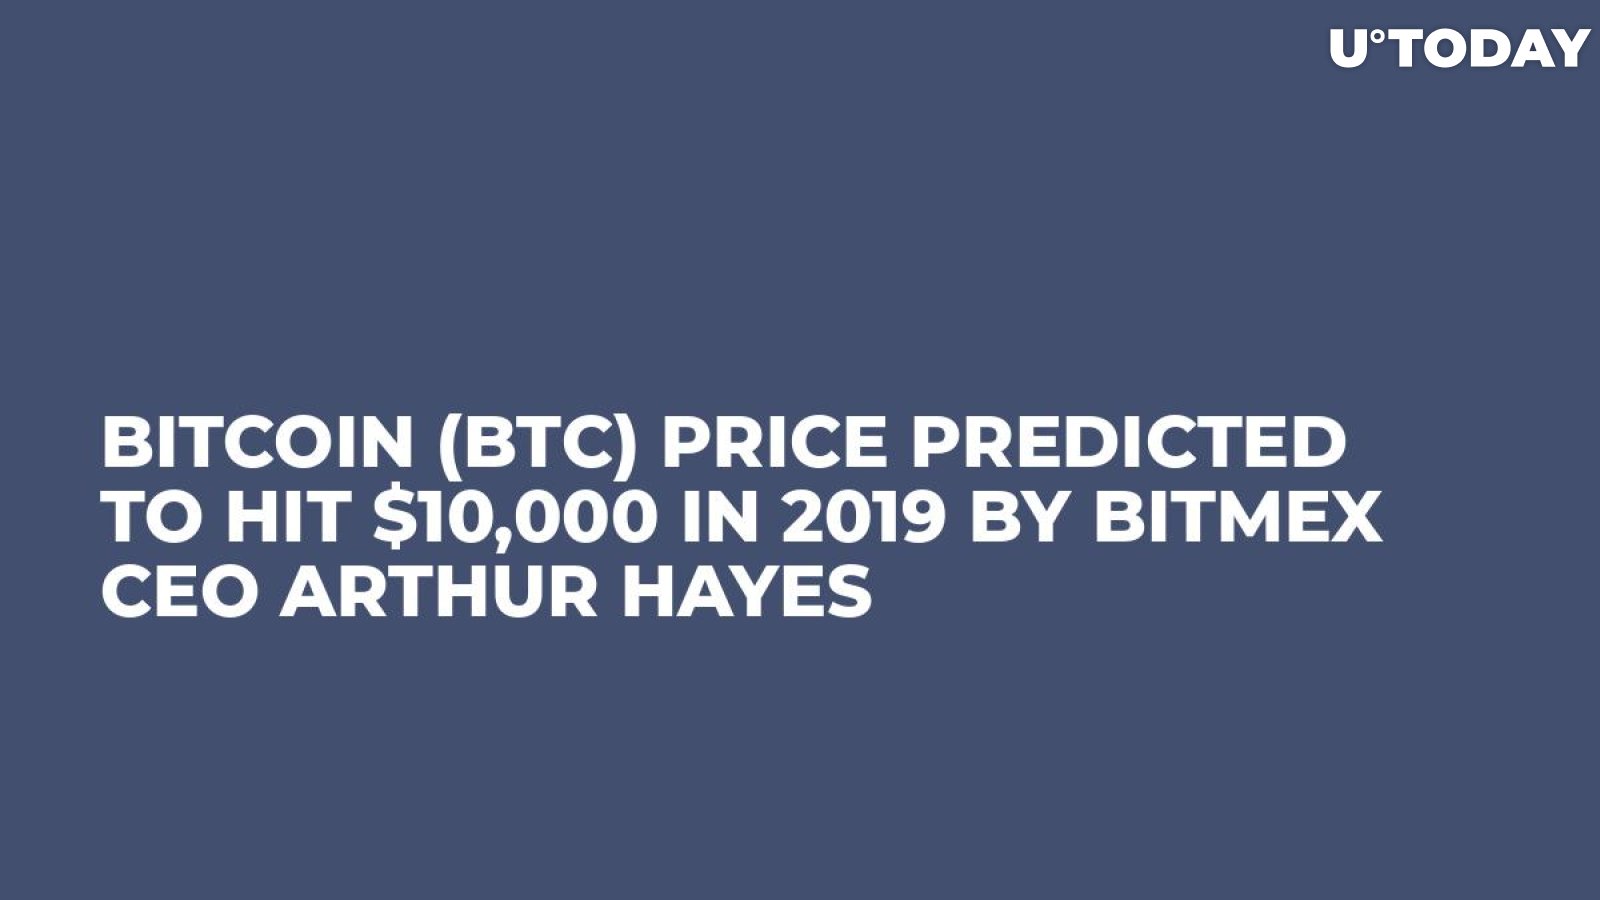 Bitcoin (BTC) Price Predicted to Hit $10,000 in 2019 by BitMEX CEO Arthur Hayes